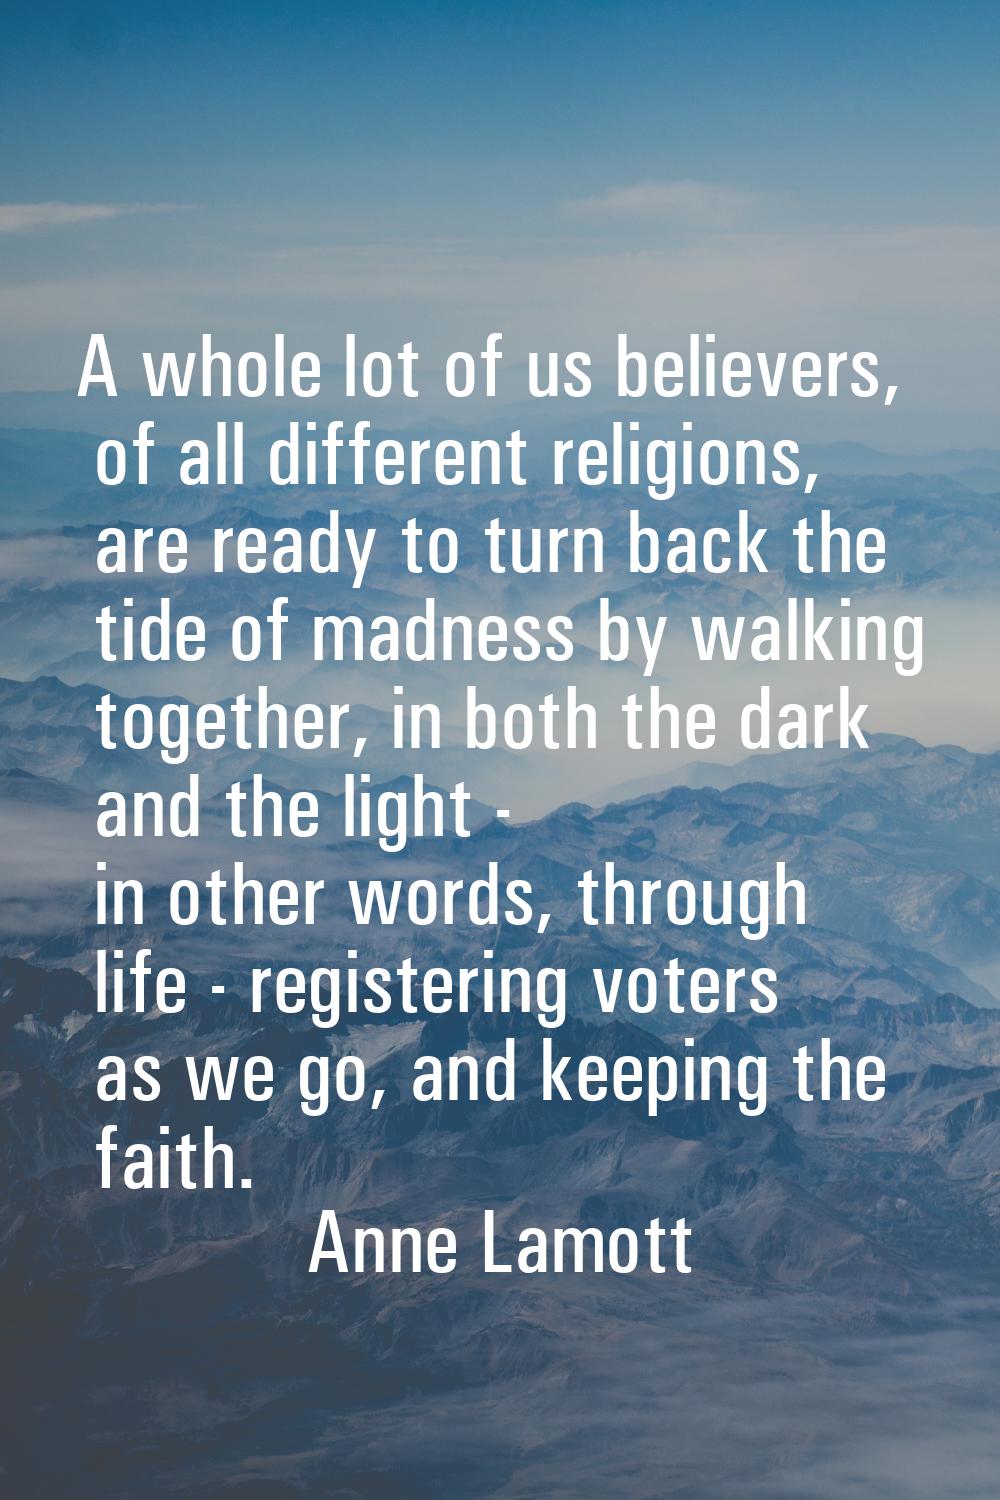 A whole lot of us believers, of all different religions, are ready to turn back the tide of madness